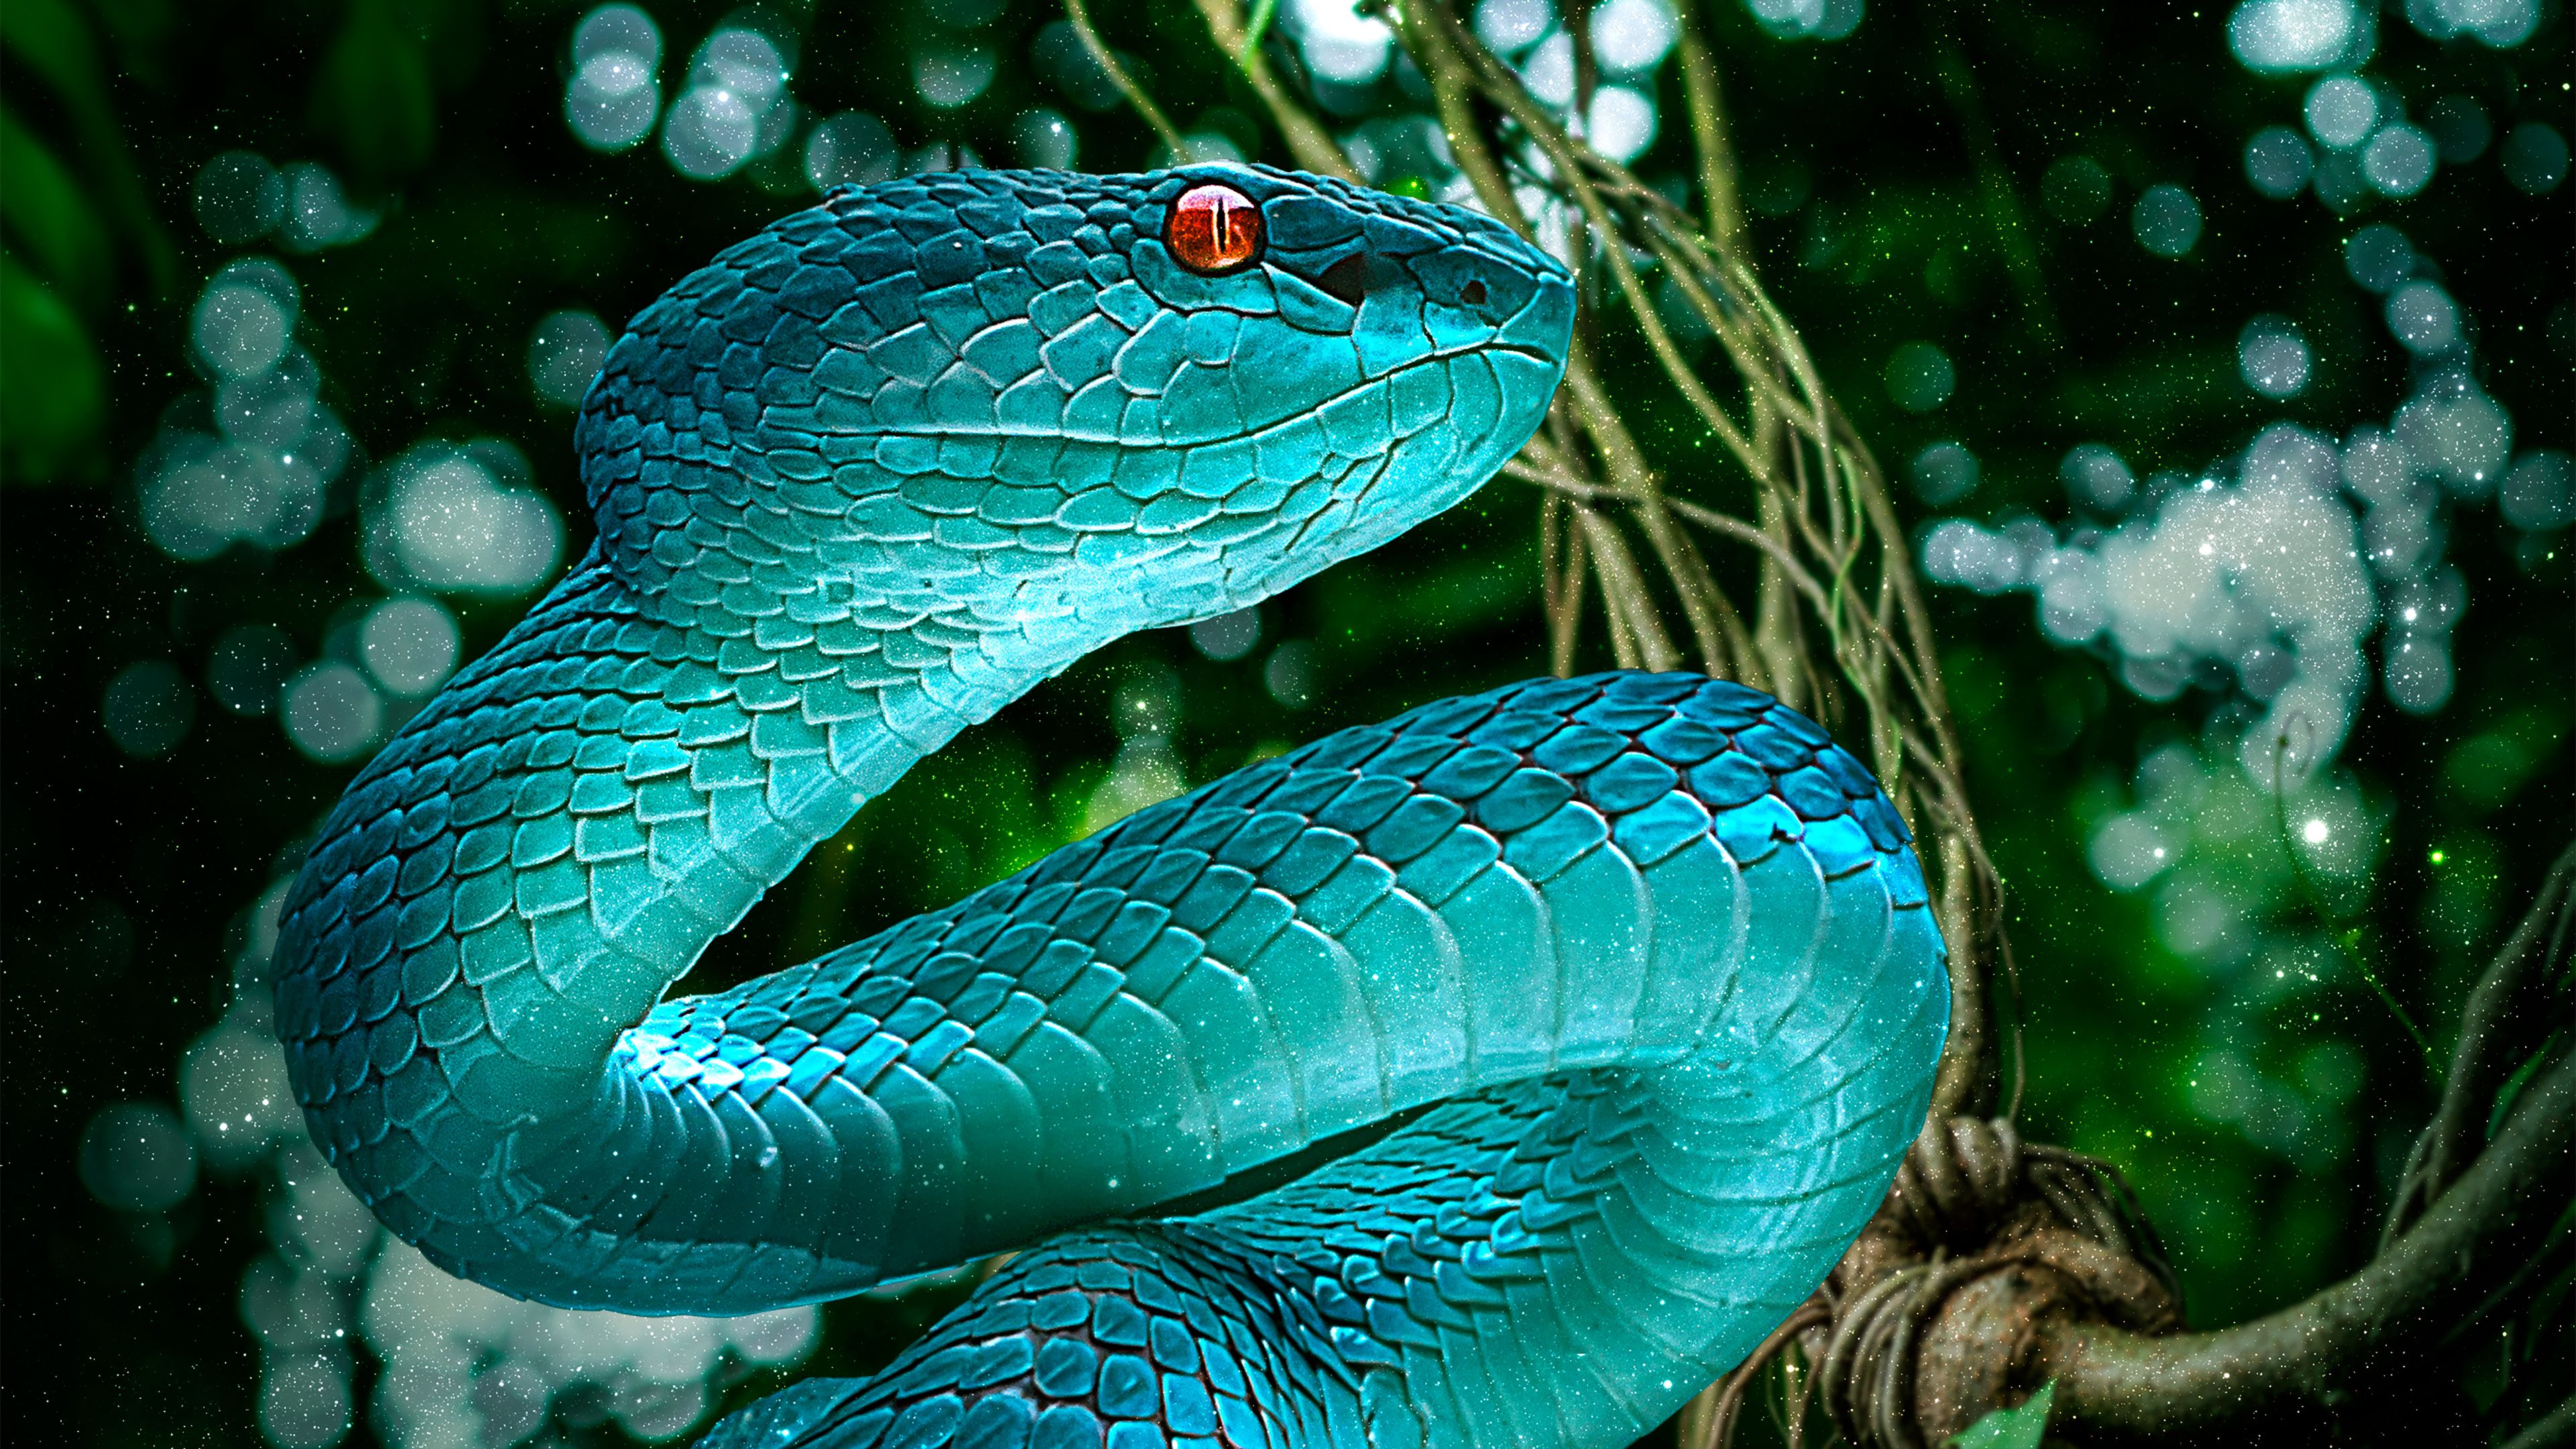 Red Snake Image  HD Wallpapers